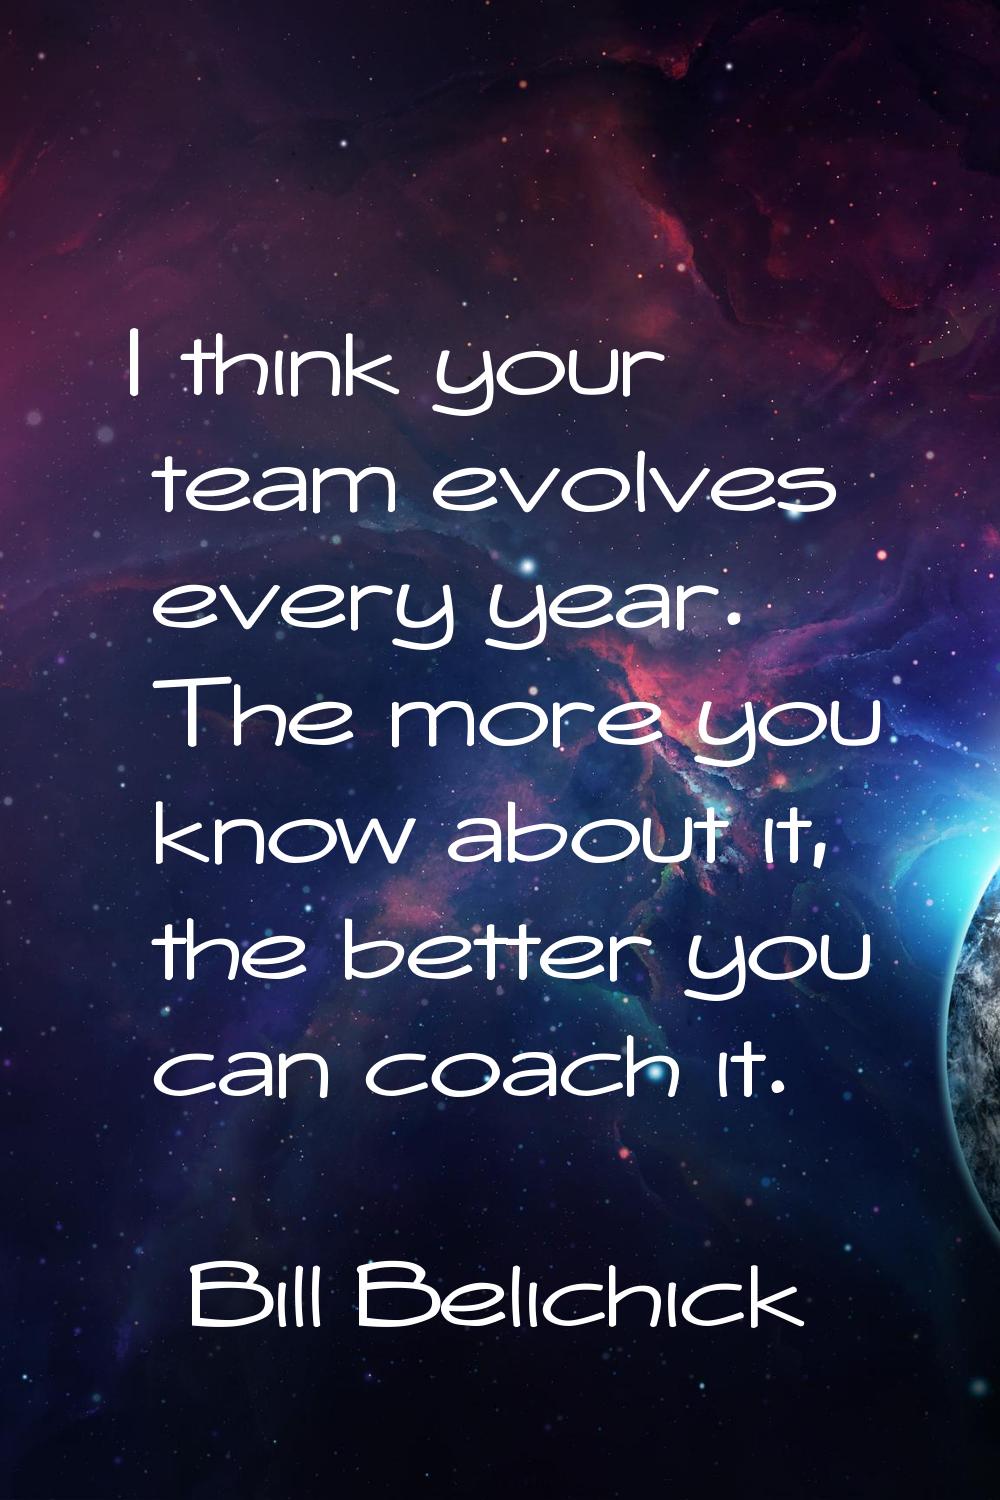 I think your team evolves every year. The more you know about it, the better you can coach it.